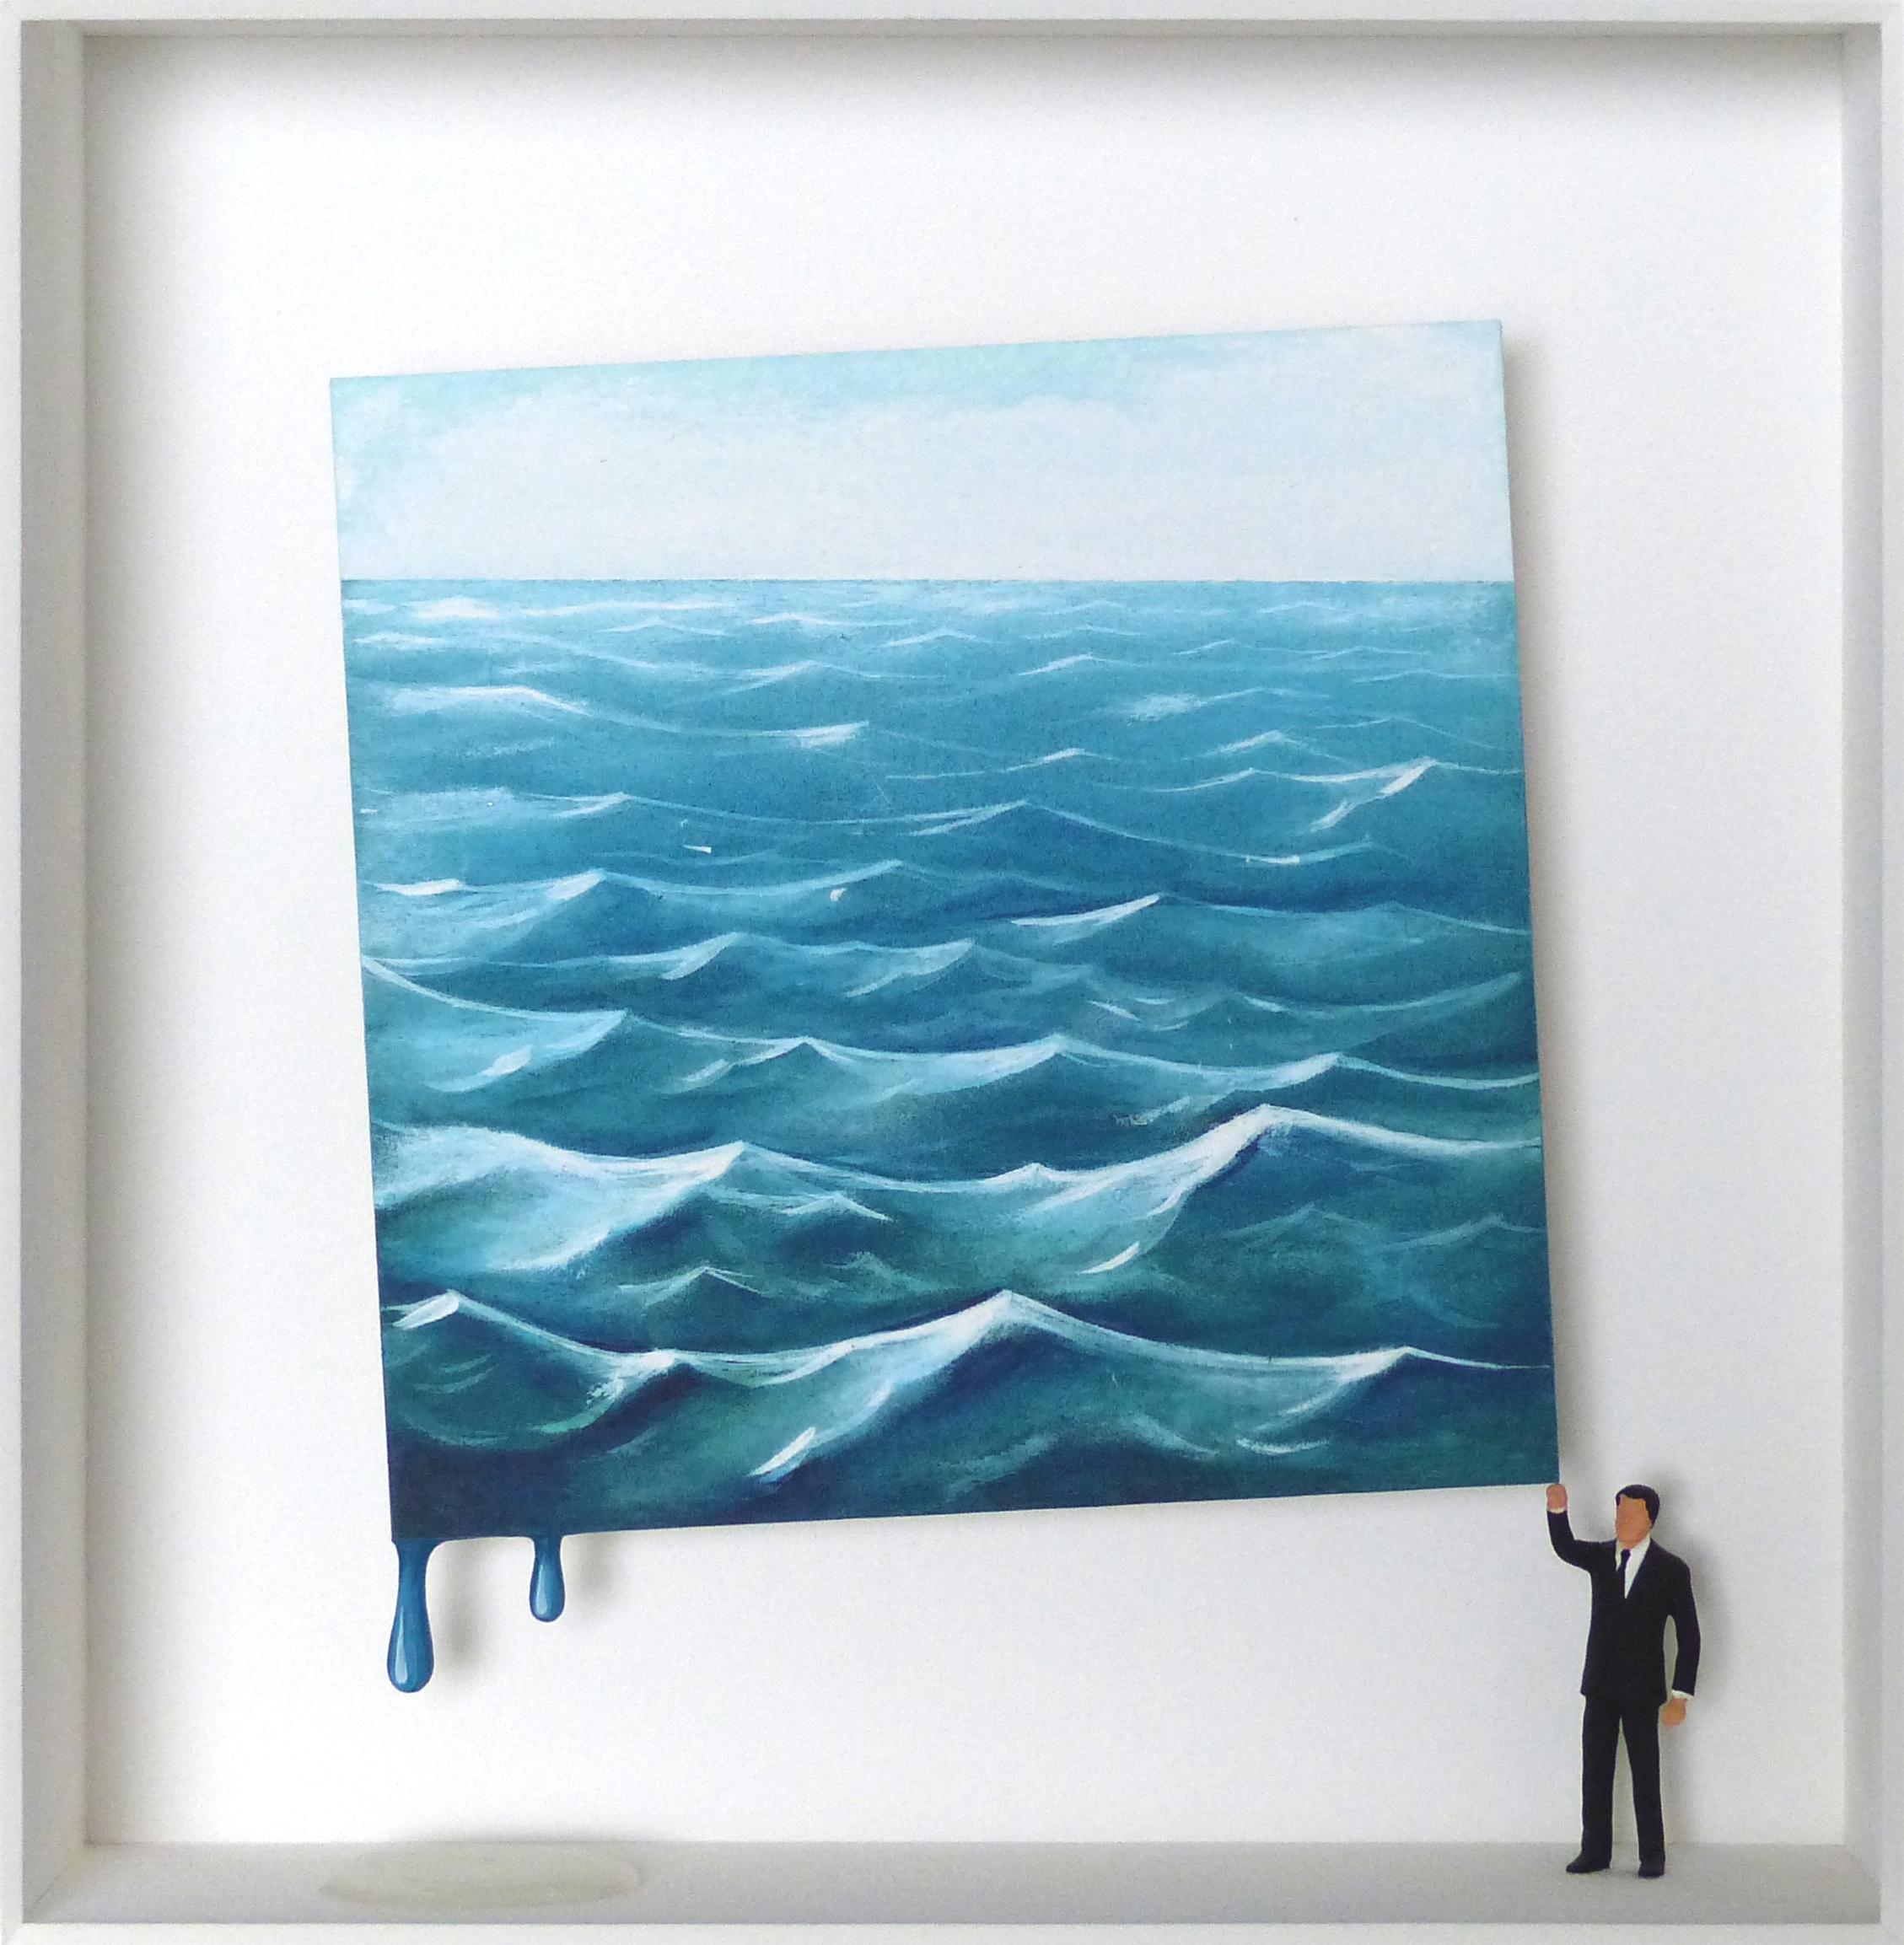 "The Roaring Waves" is an original mixed media artwork by Volker Kuhn with a surrealist touch. The work is hand-signed by the artist below the artwork on the mat. 51 x 49 cm framed in a silver wood-framing with simple hanging mechanism on back. 